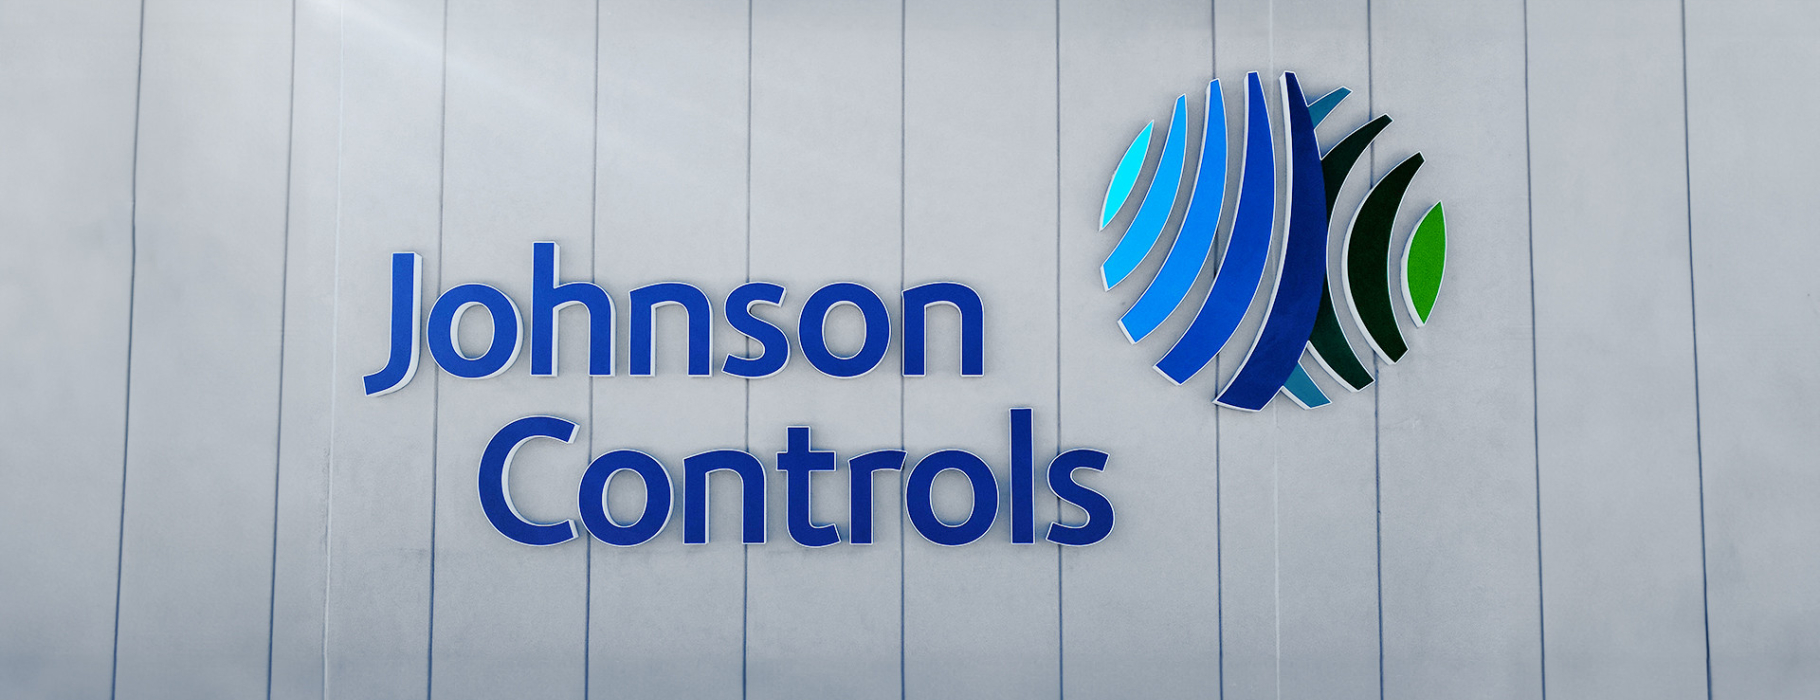 Multi-phase global brand relaunch for Johnson Controls.